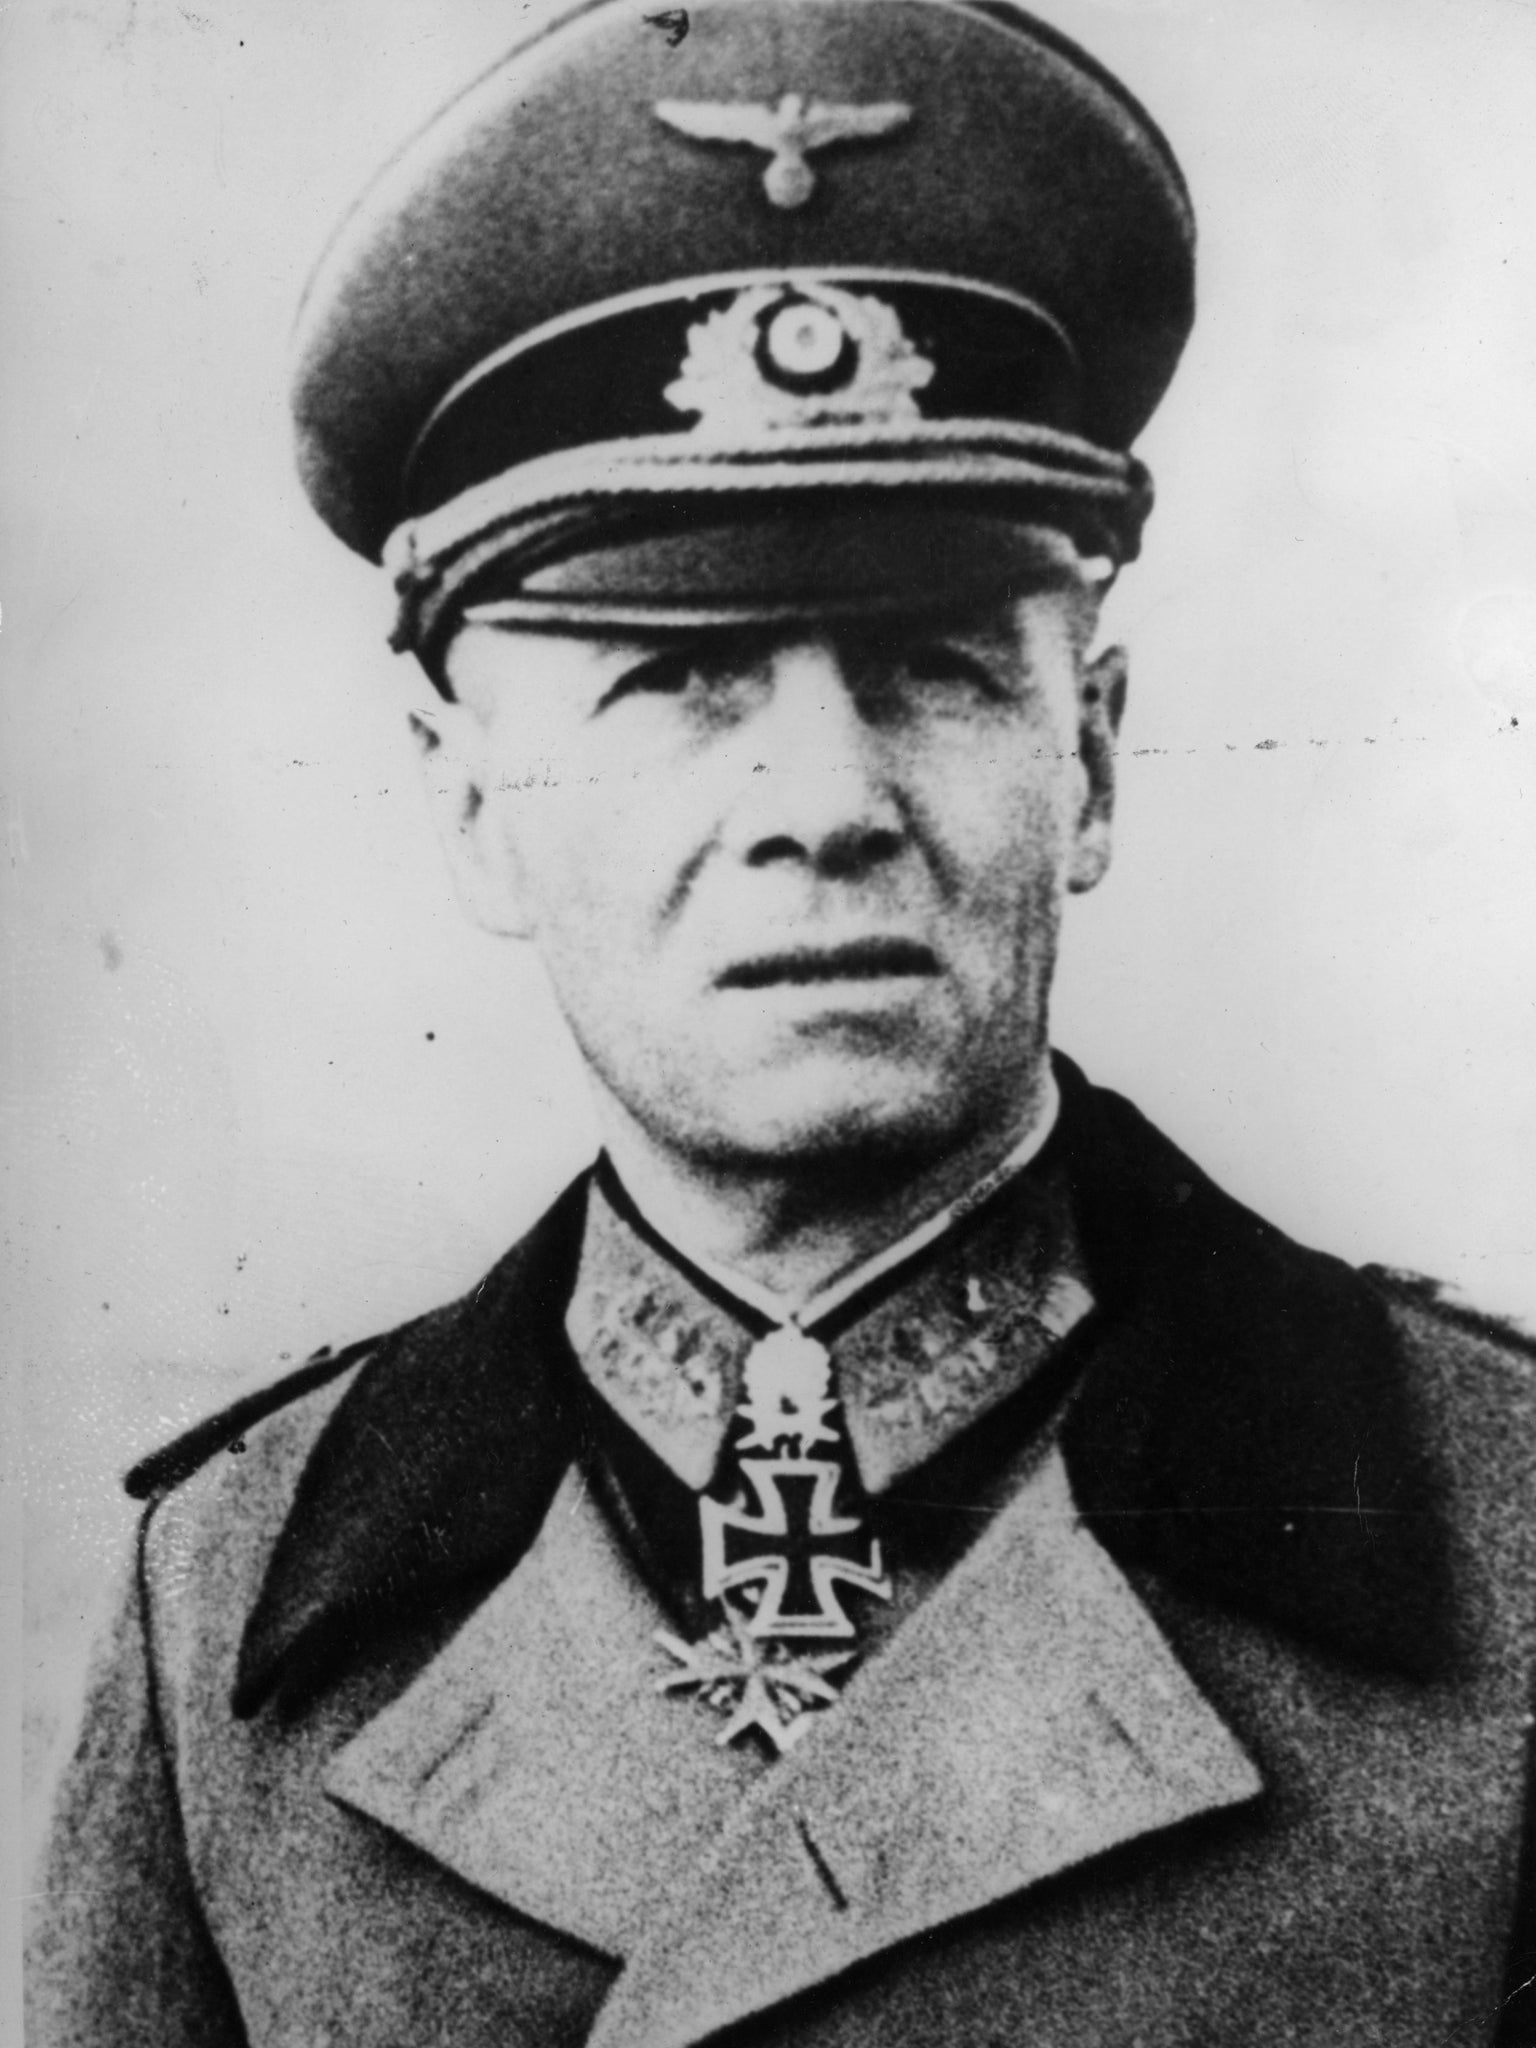 Field marshal Erwin Rommel was among the list of Ally assassination targets